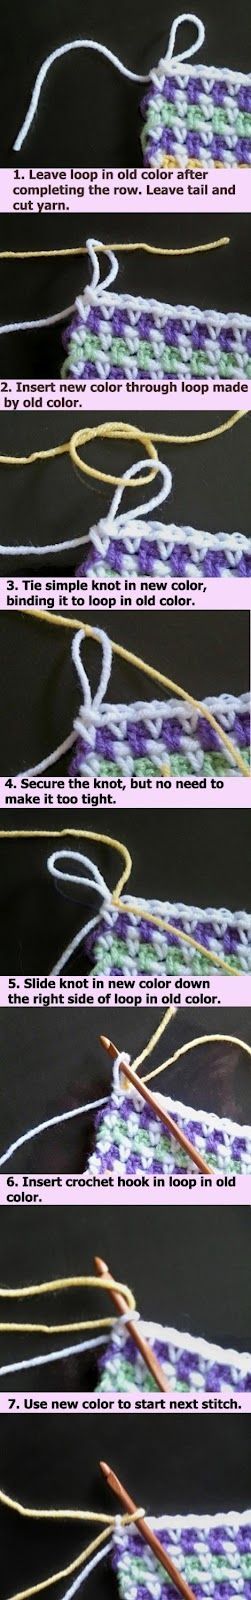 Changing yarn invisibly on crochet